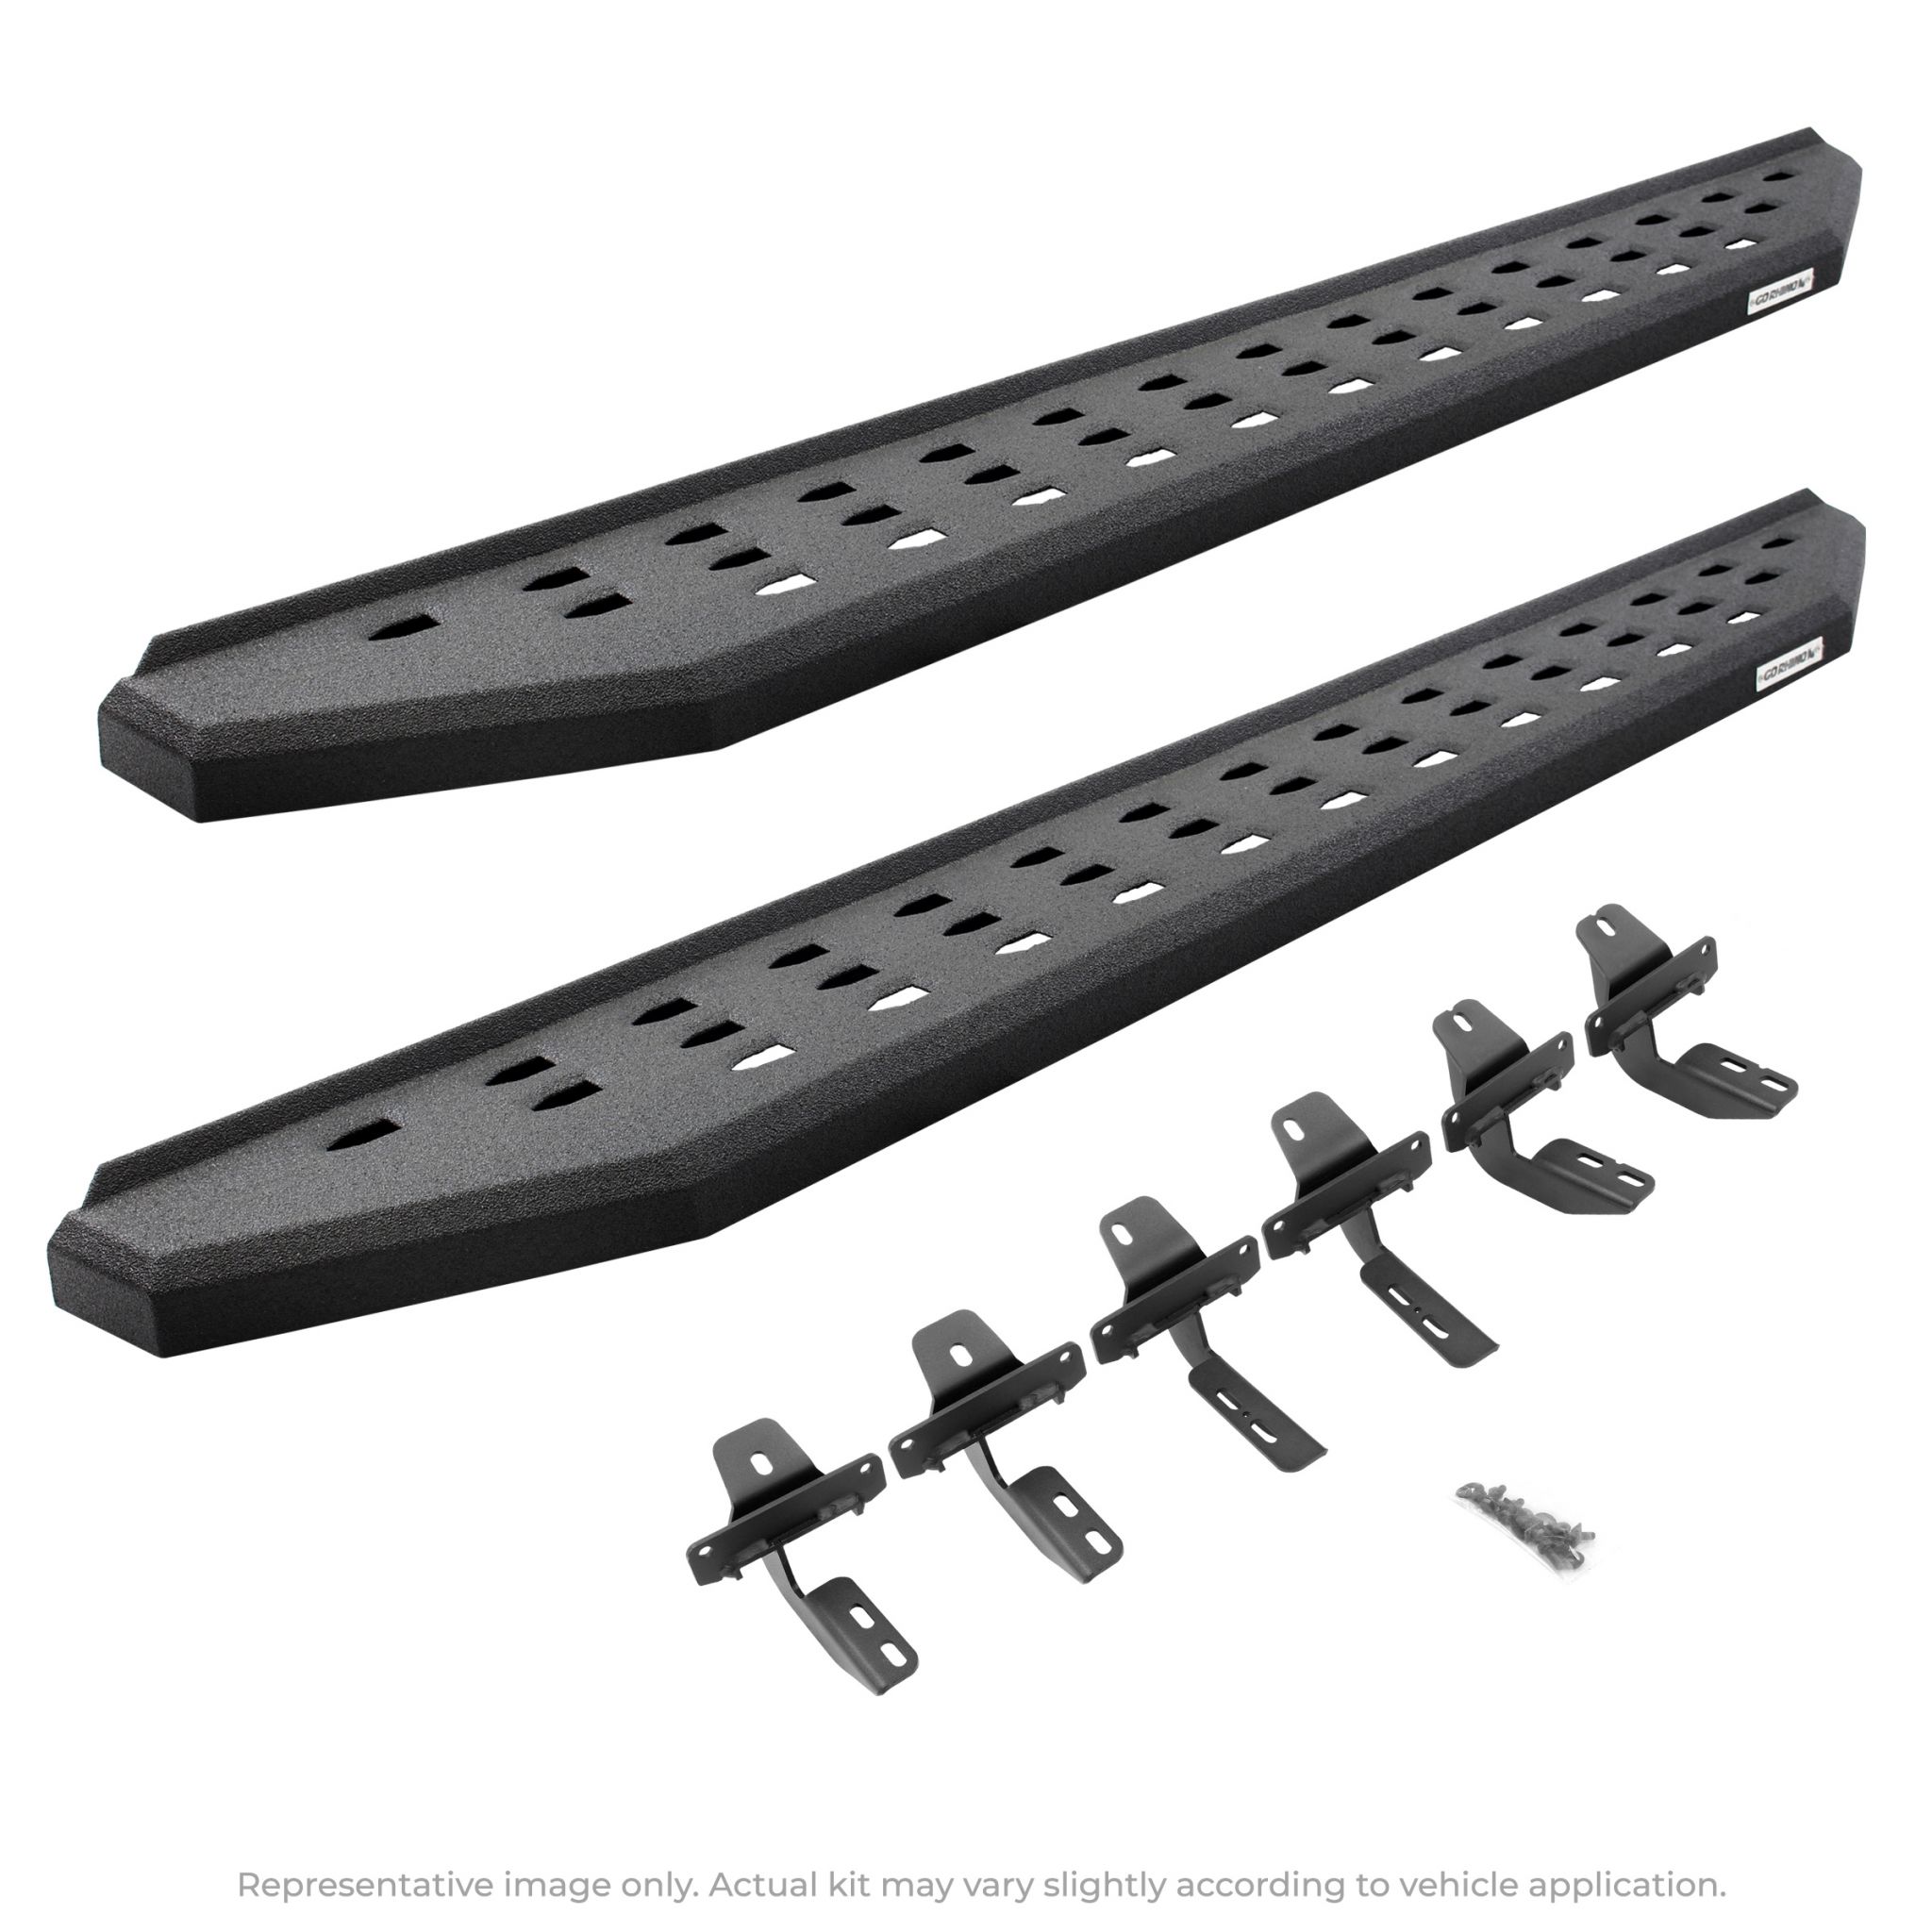 Go Rhino - 69430680T - RB20 Running Boards With Mounting Brackets - Protective Bedliner Coating